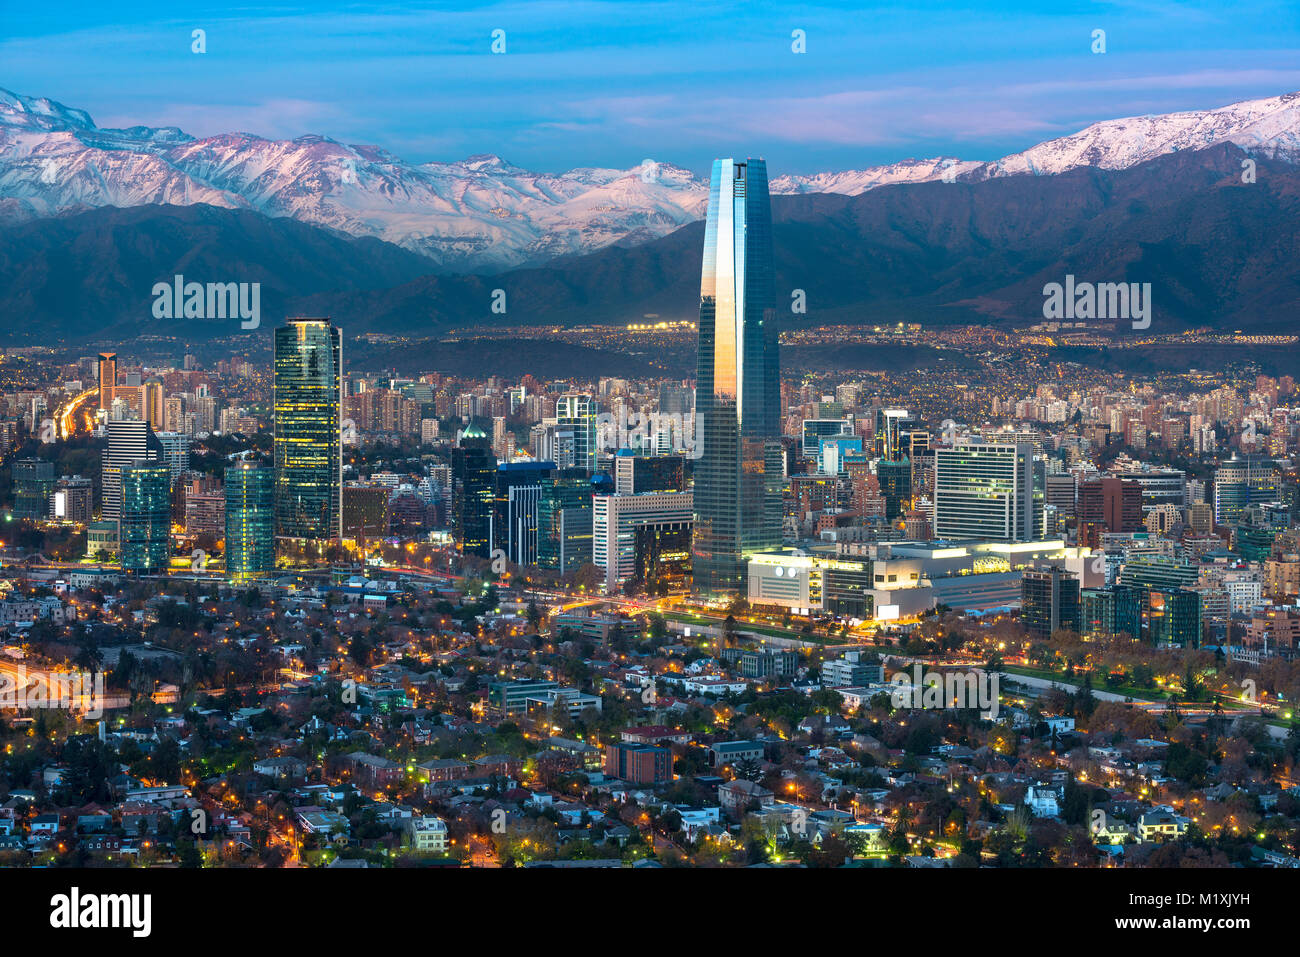 Panoramic view of Providencia and Las Condes districts with Costanera Center skyscraper, Titanium Tower and Los Andes Mountain Range, Santiago de Chil Stock Photo